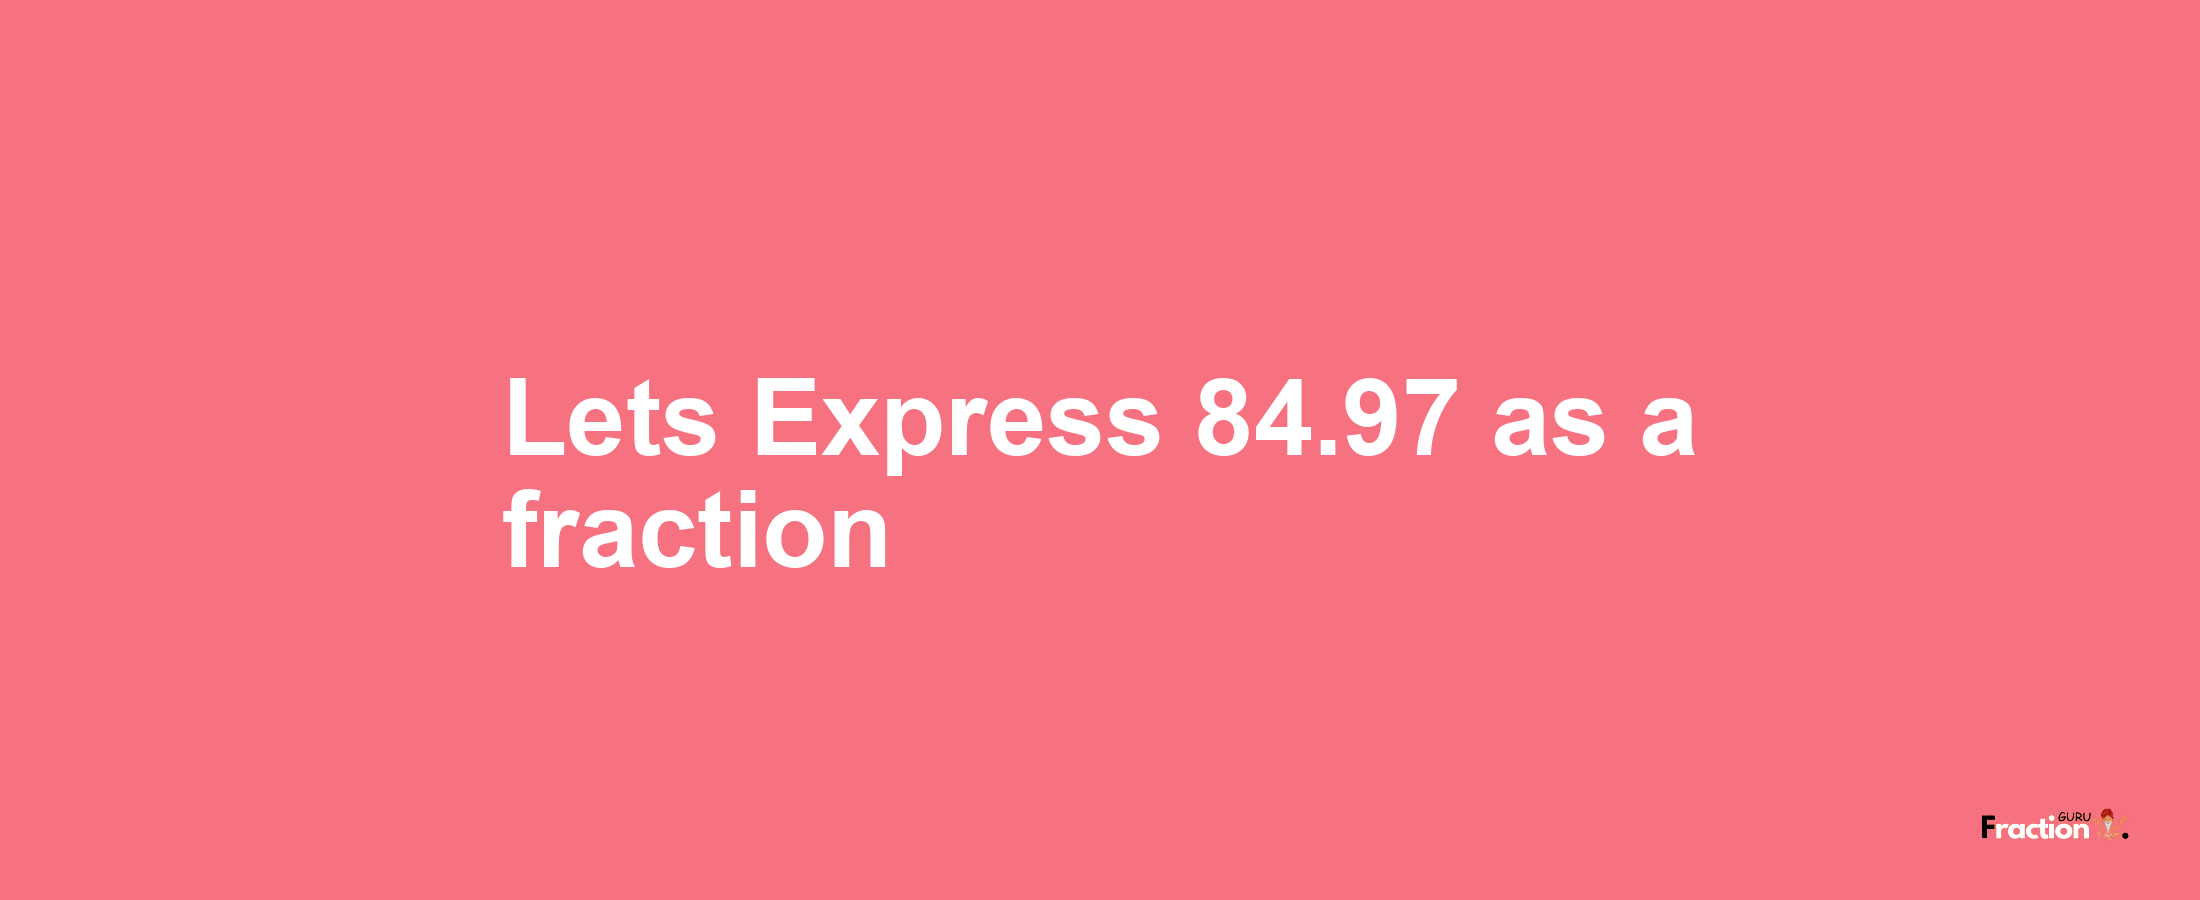 Lets Express 84.97 as afraction